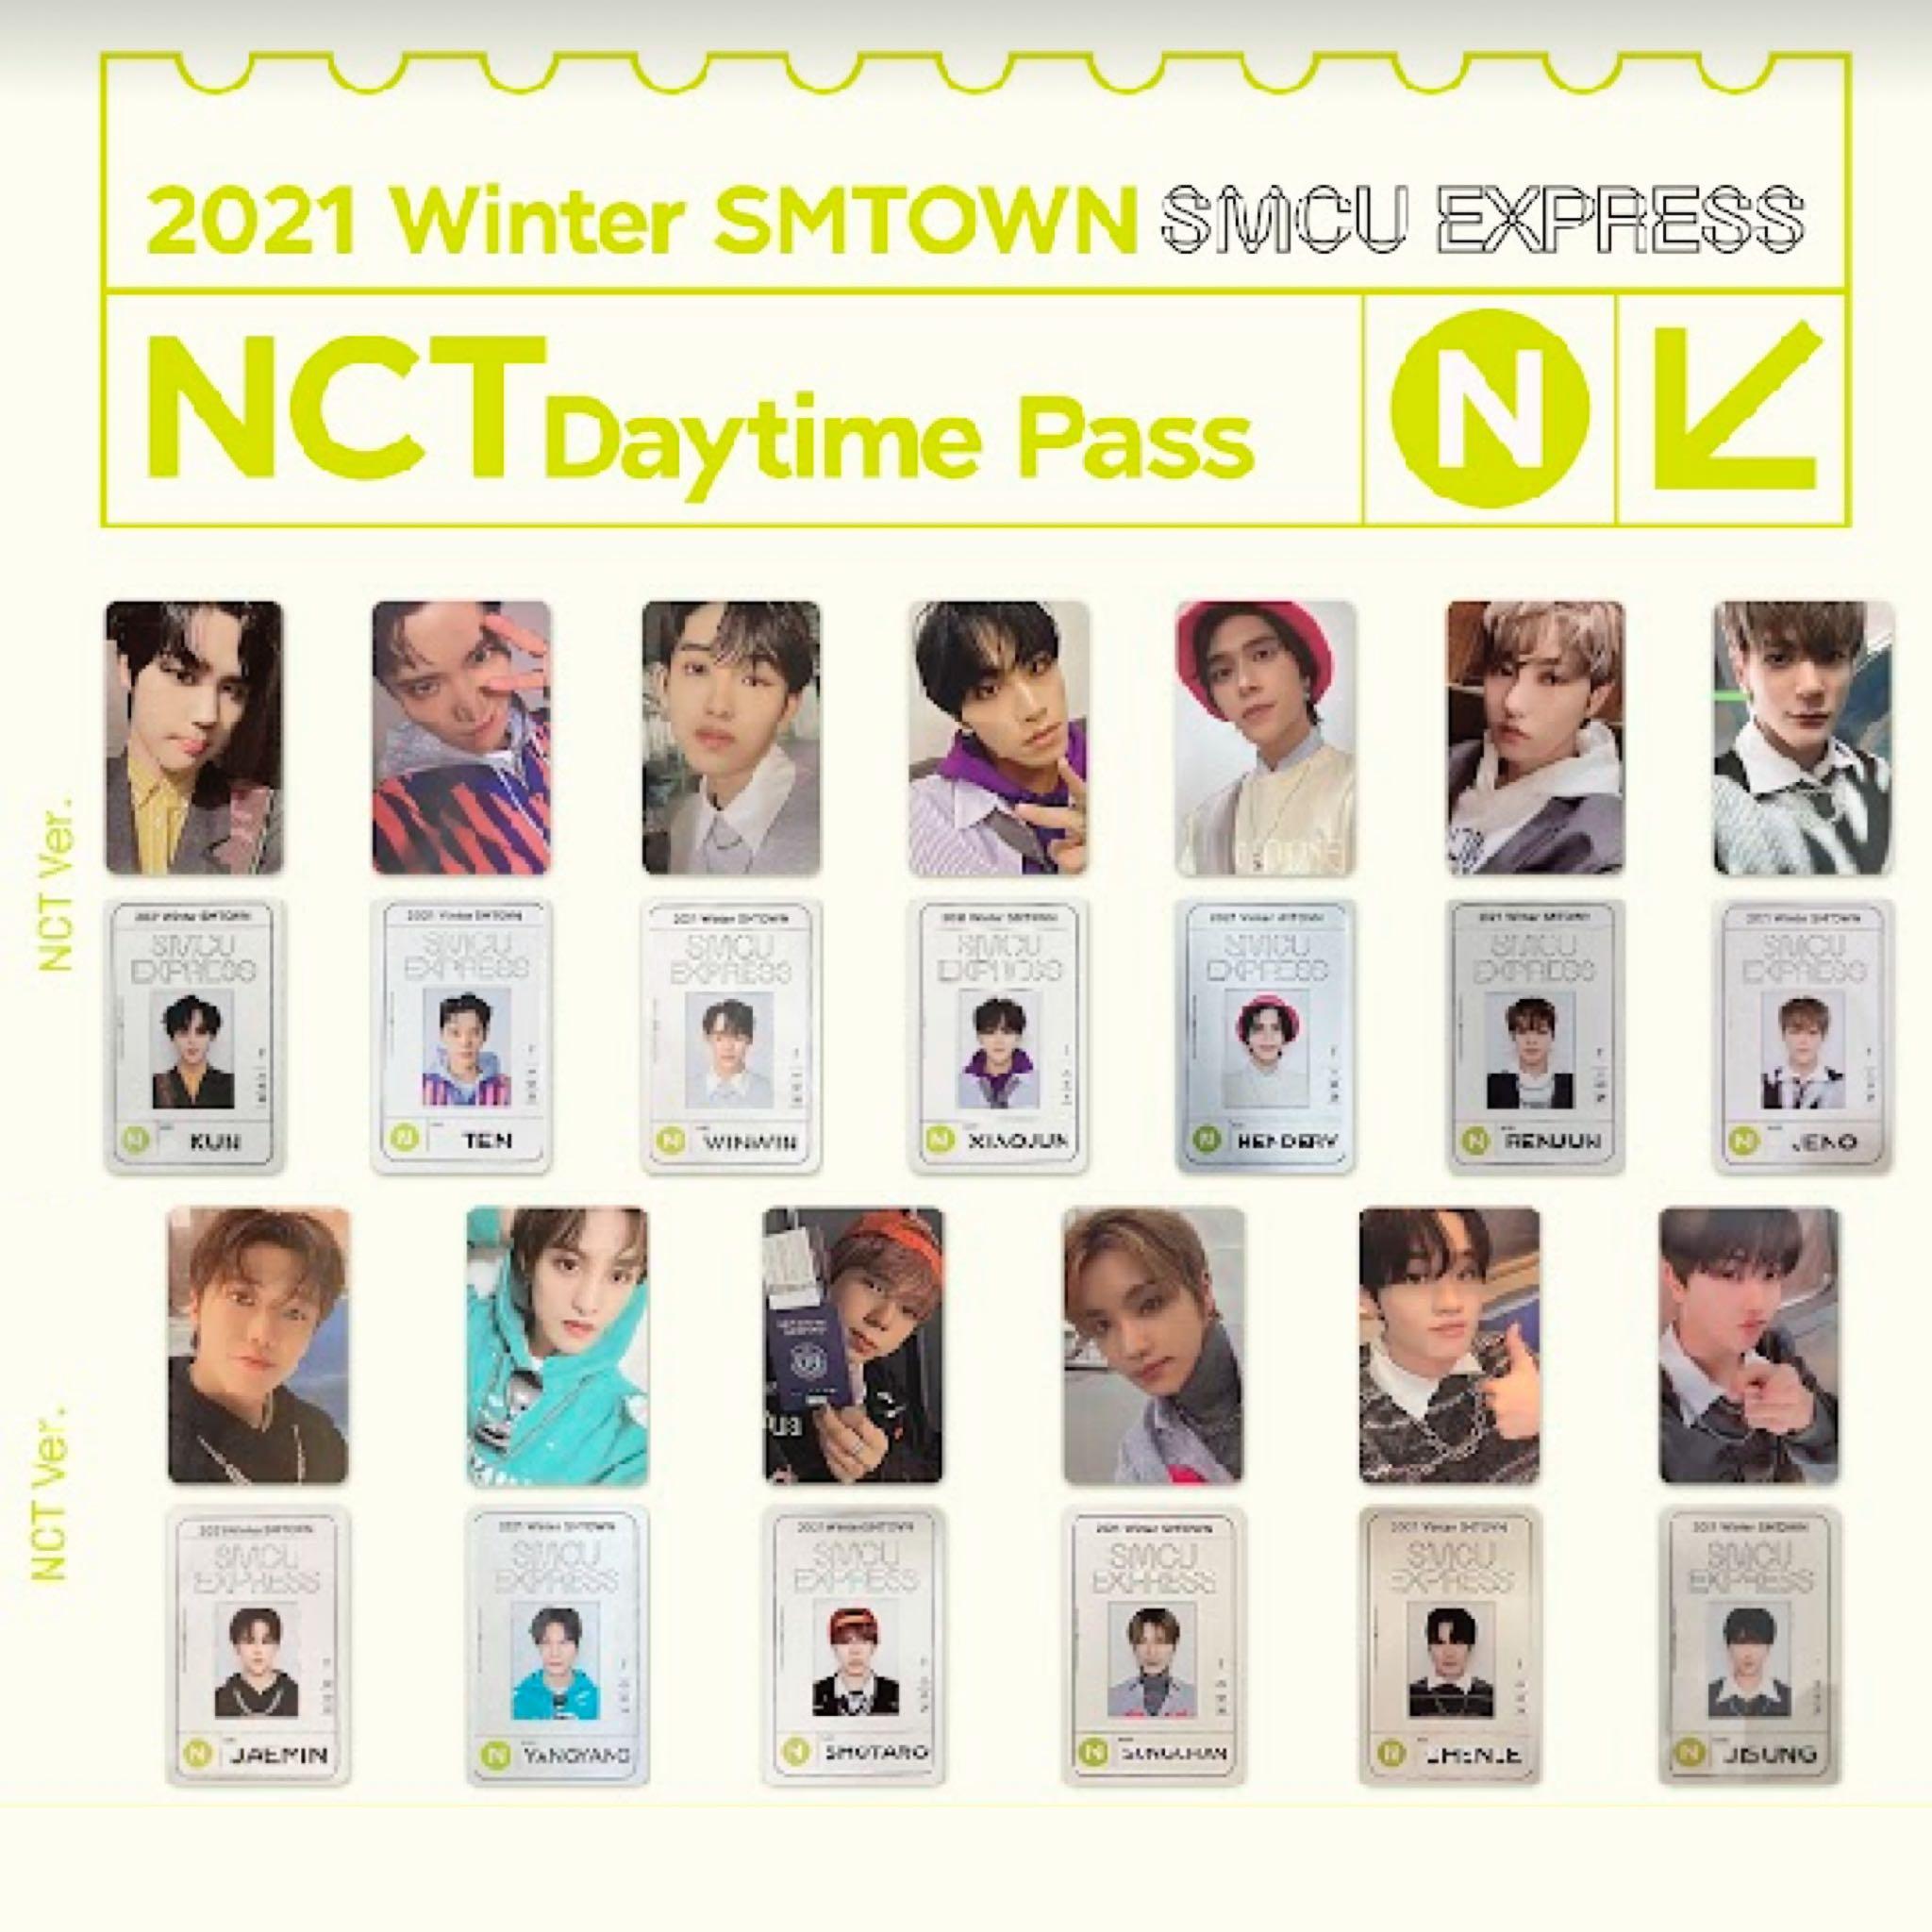 [PO] NCT Daytime Pass 2021 Winter SMTOWN SMCU Express Official ...